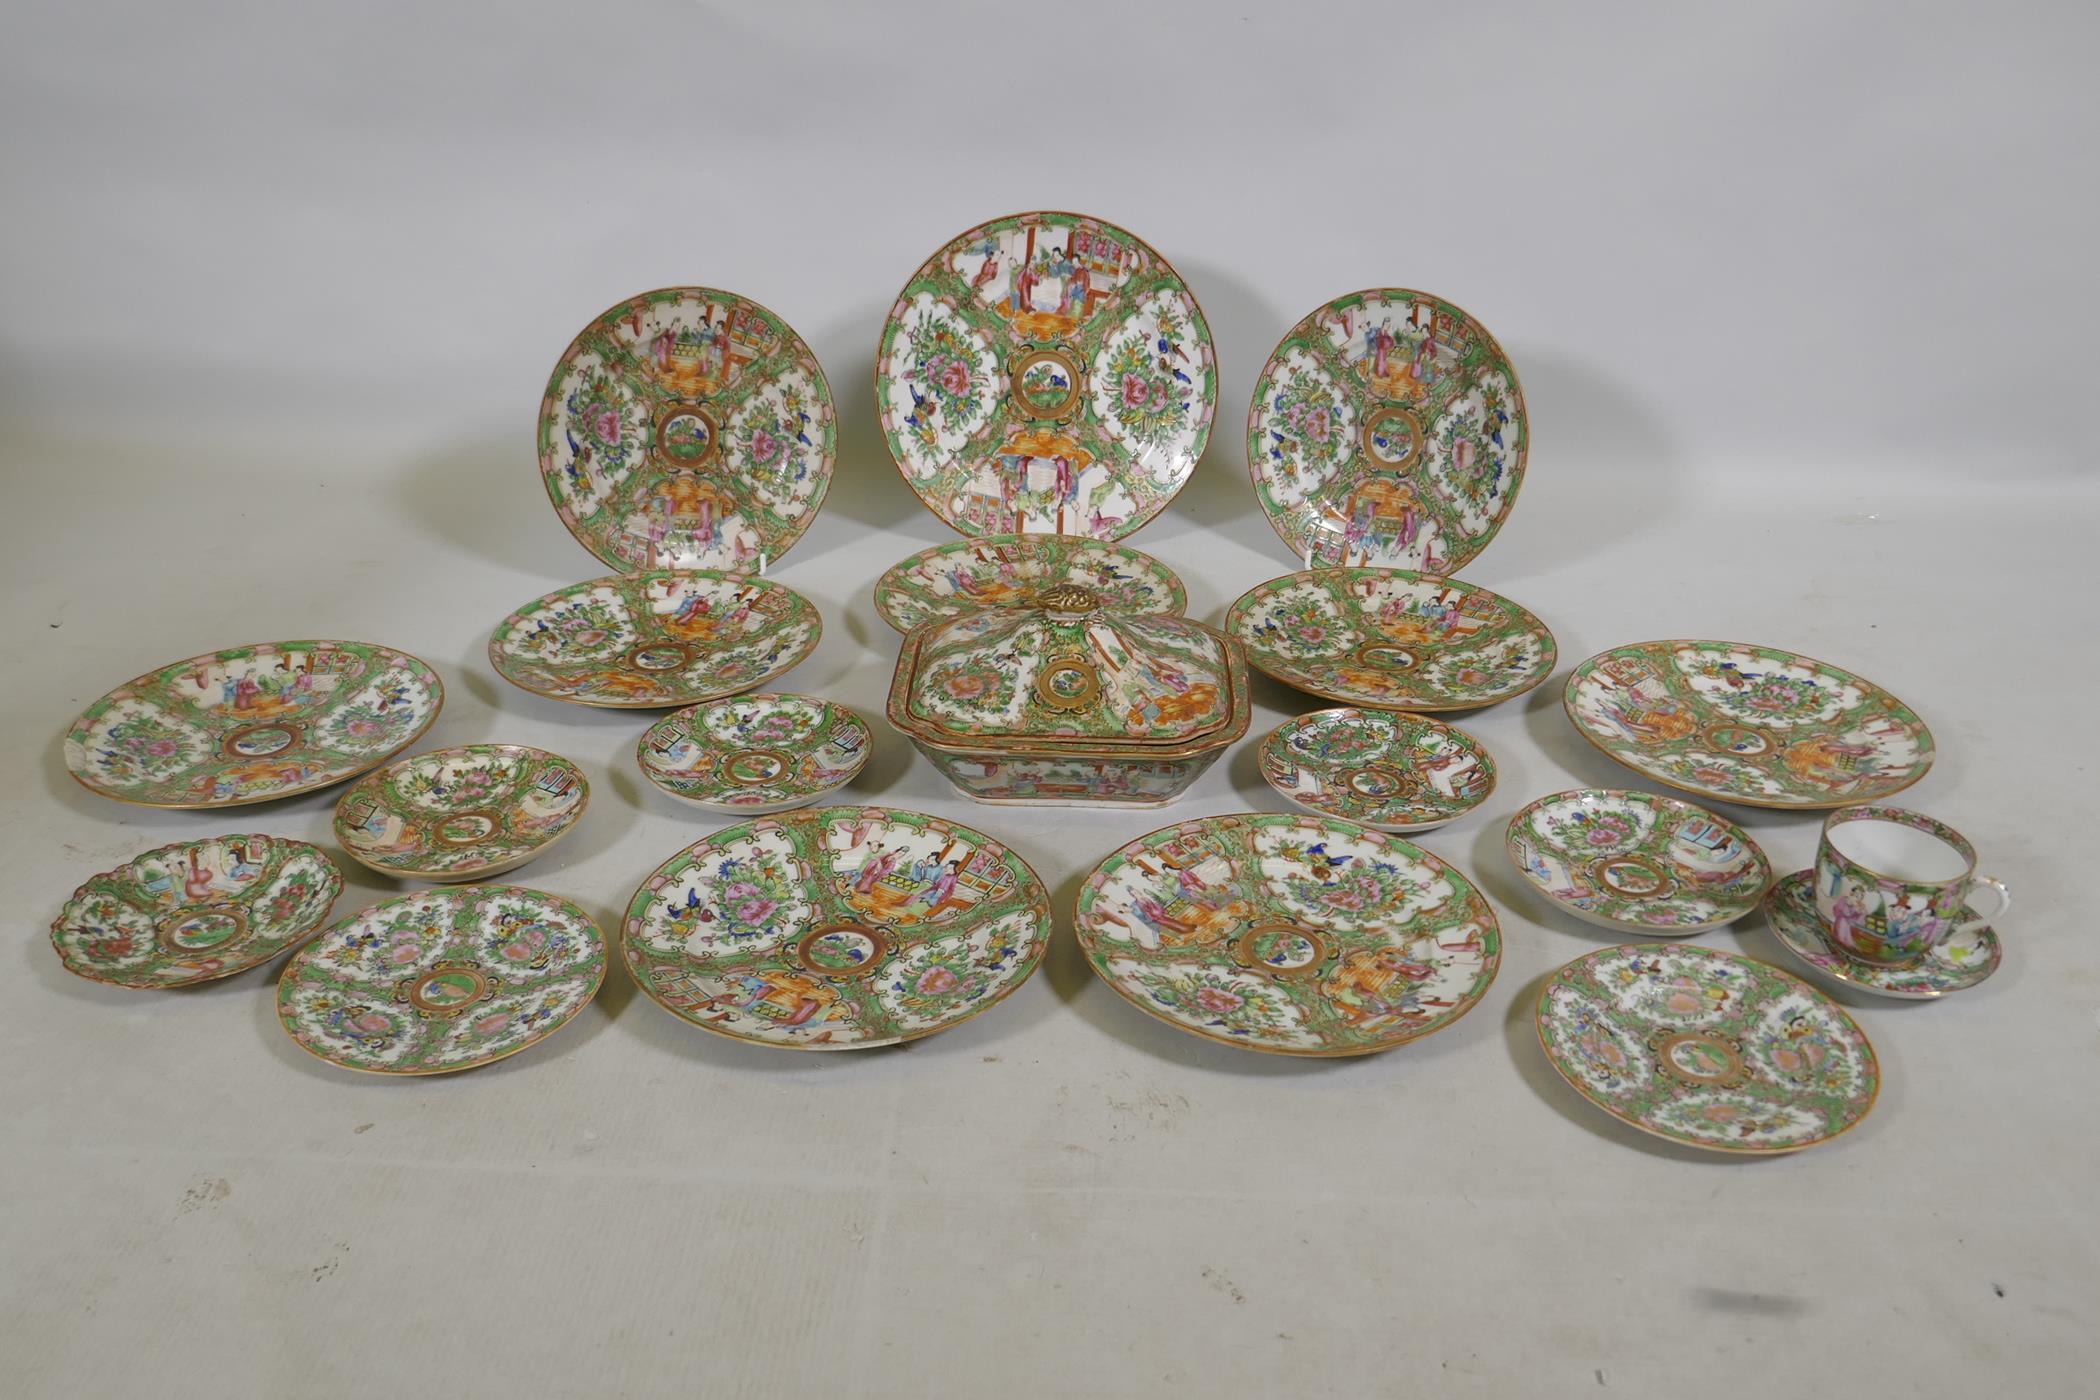 A collection of Cantonese famille verte export ware porcelain, largest plate 25cm diameter - Image 5 of 6